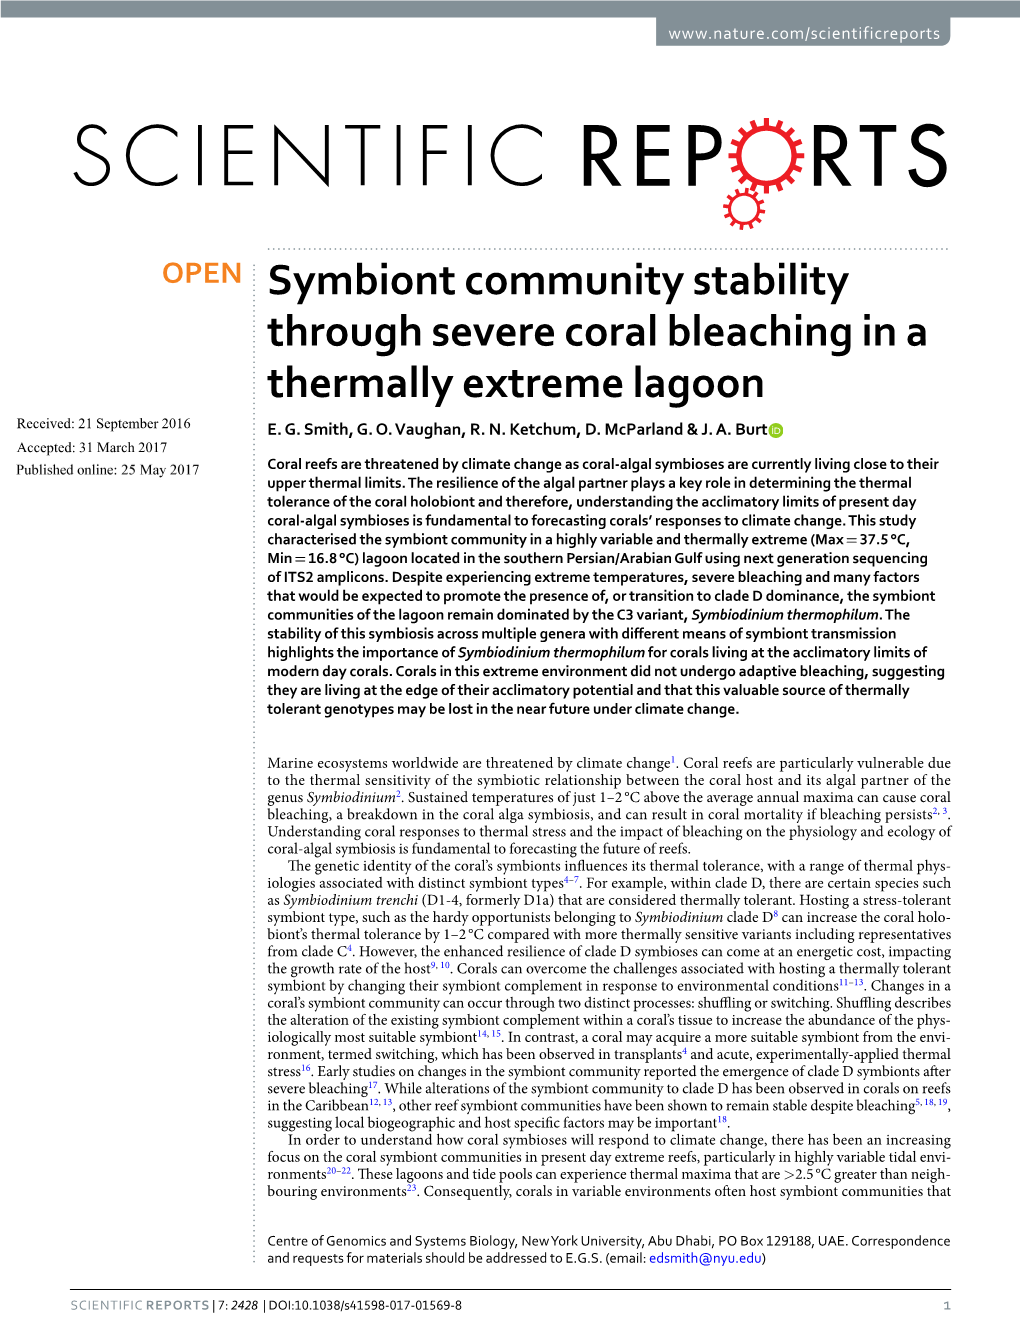 Symbiont Community Stability Through Severe Coral Bleaching in a Thermally Extreme Lagoon Received: 21 September 2016 E